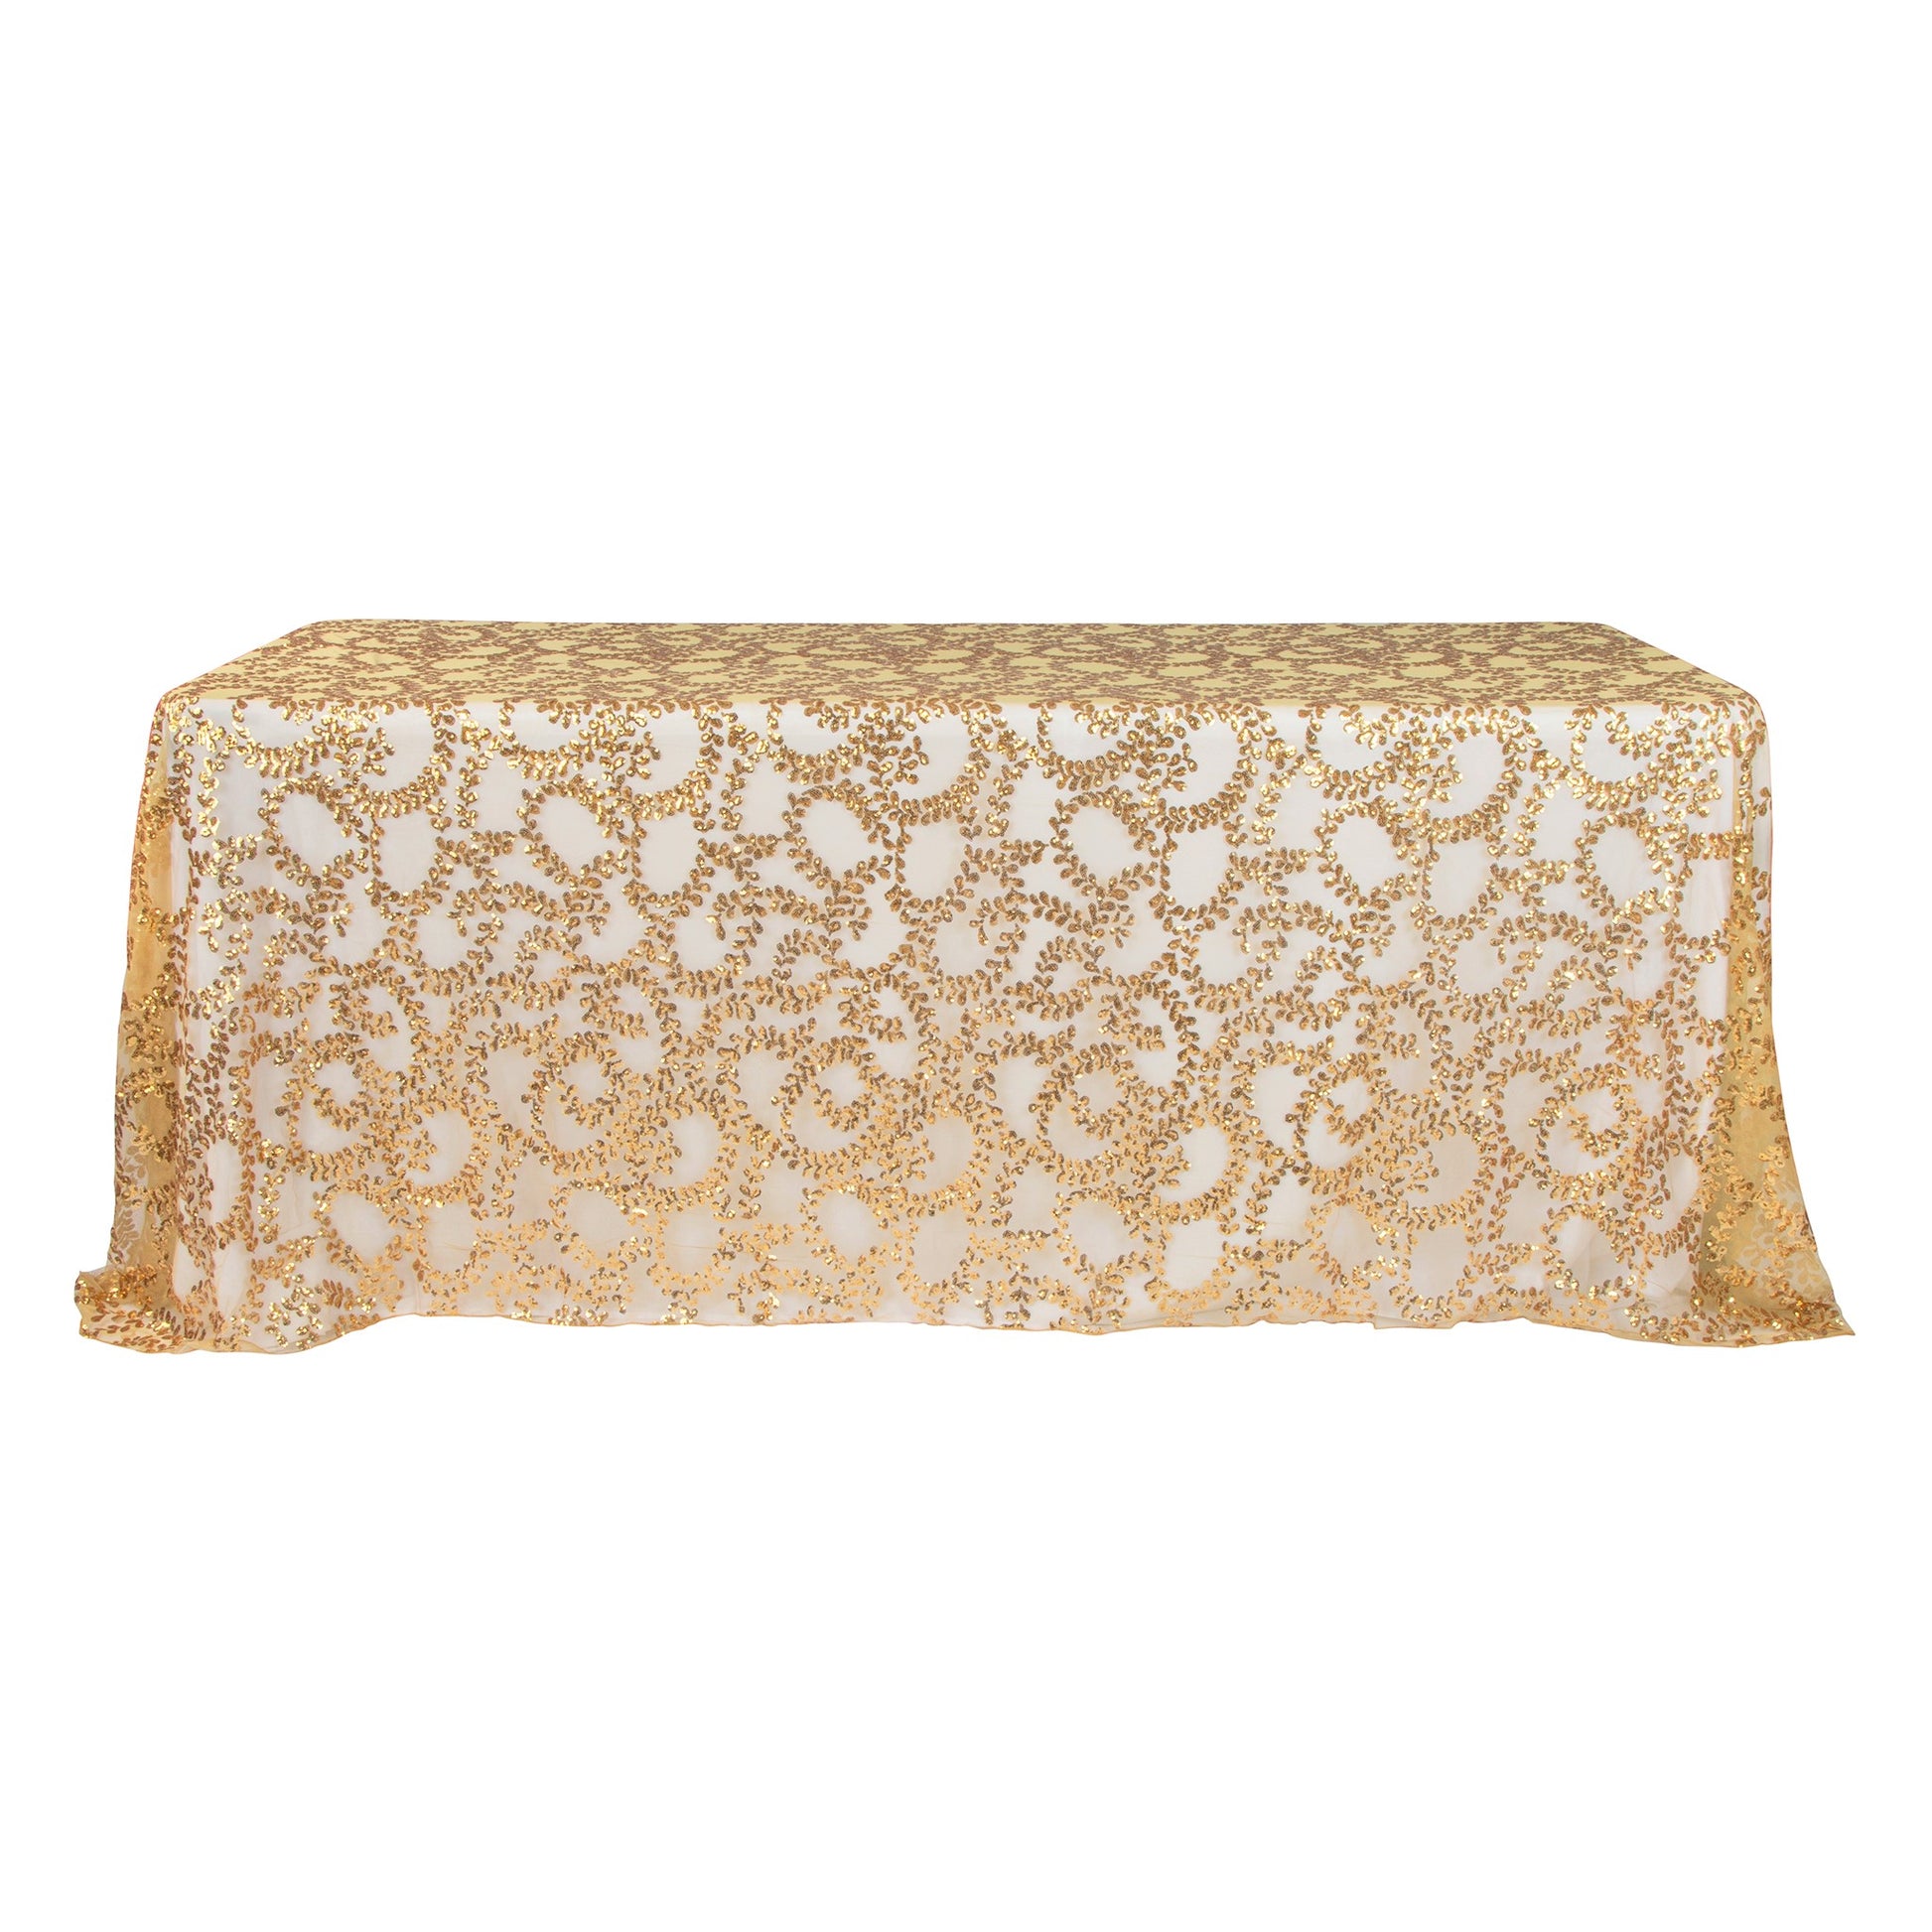 Sequin Vine Tablecloth Overlay 90"x132" Rectangle - Gold